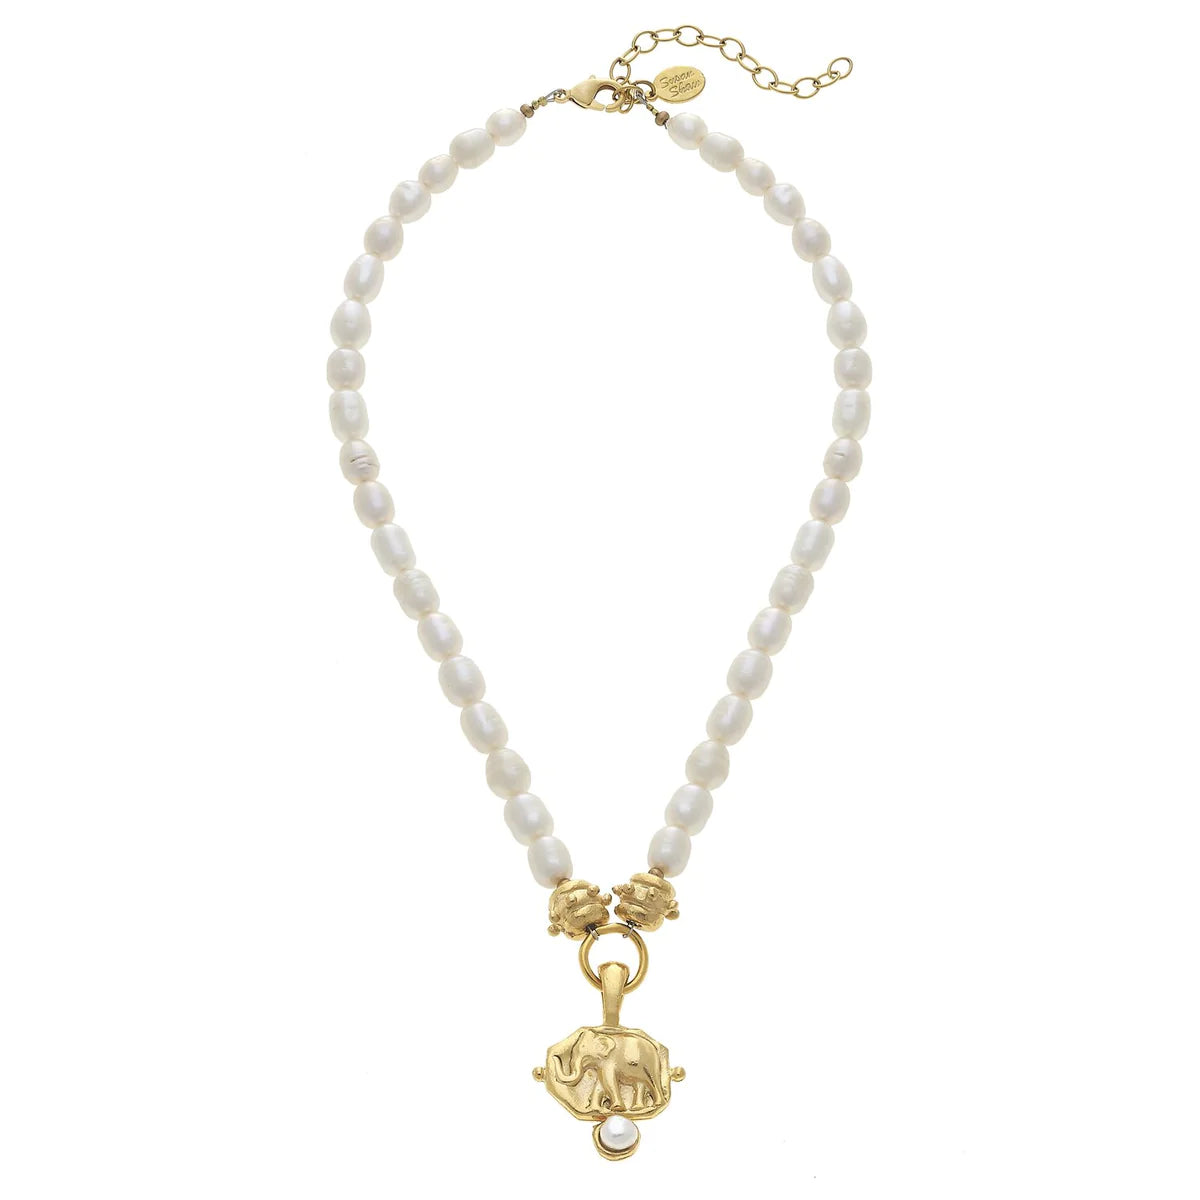 Susan Shaw- Elephant Intanglio Pearl Necklace